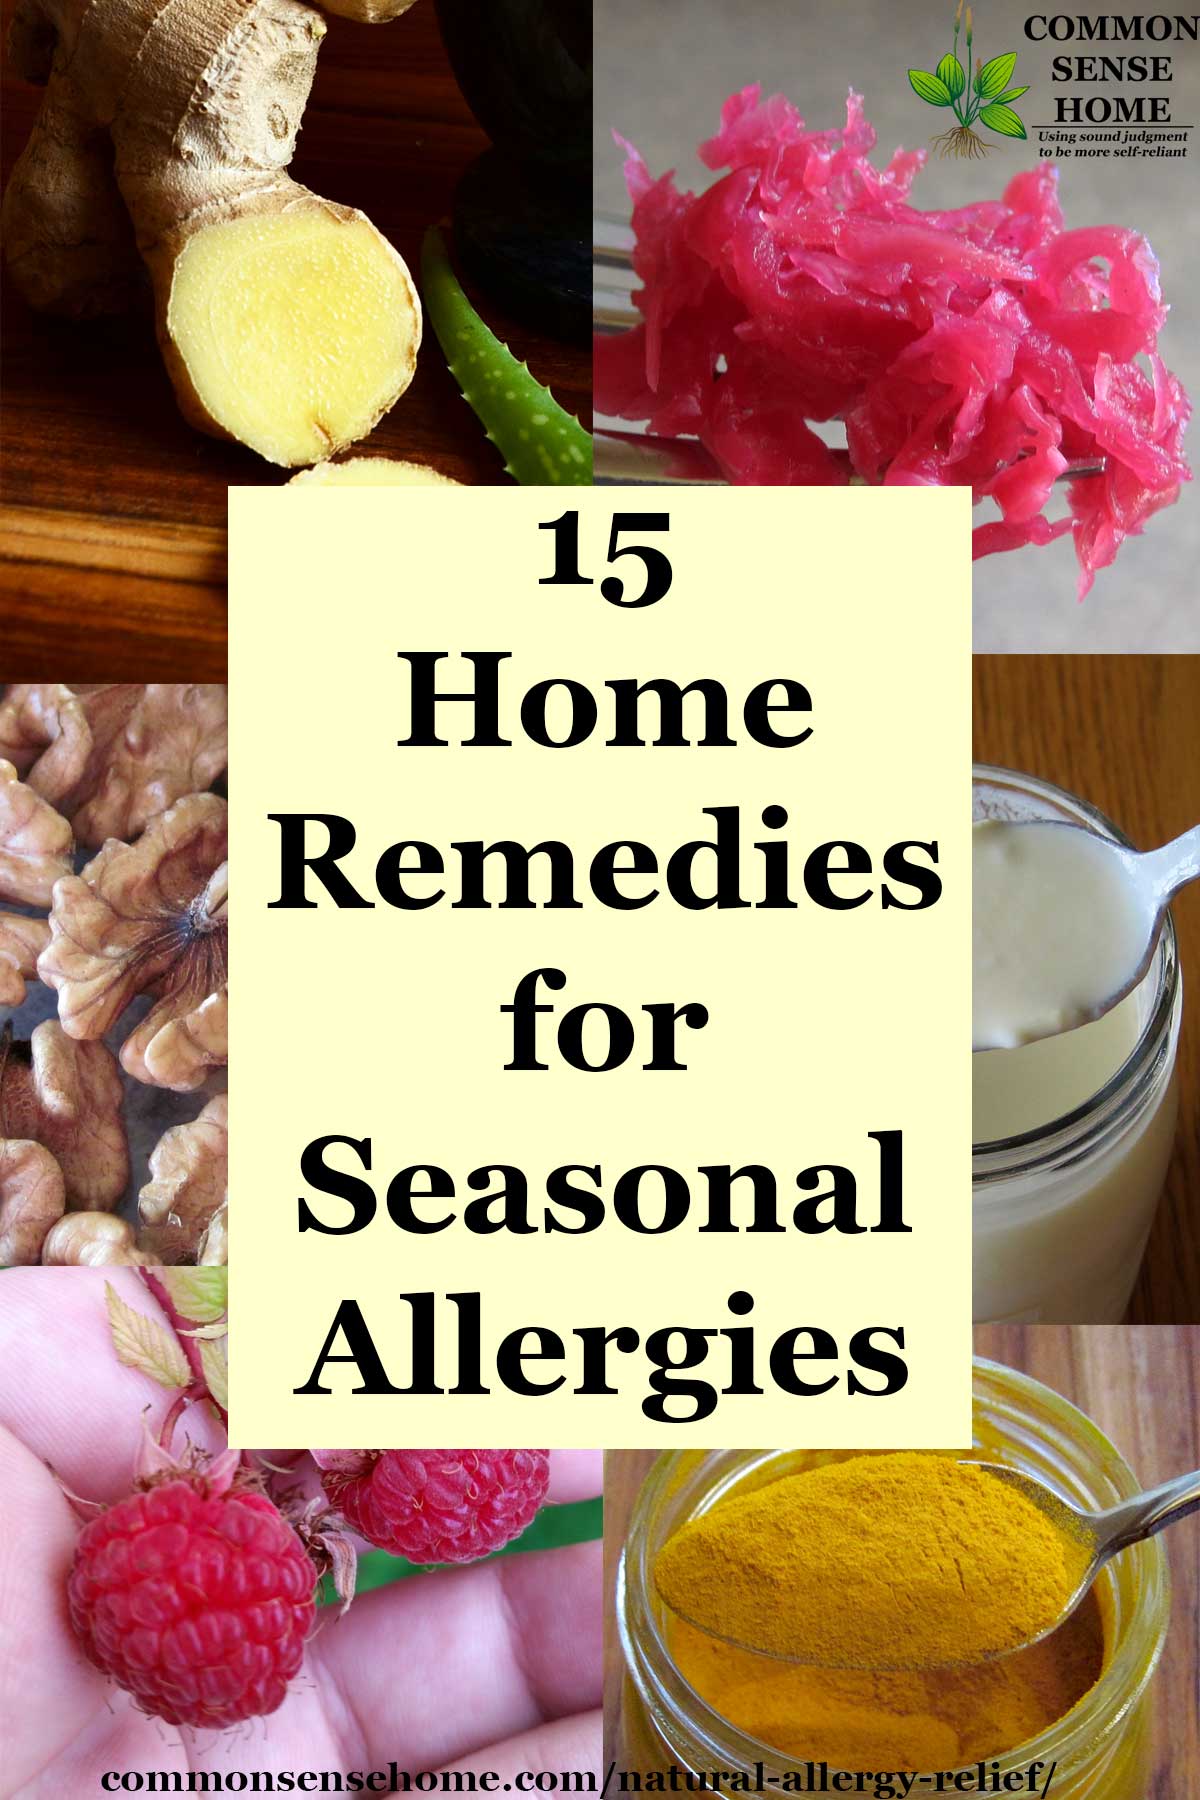 Natural Allergy Relief - 15 Home Remedies for Seasonal Allergies